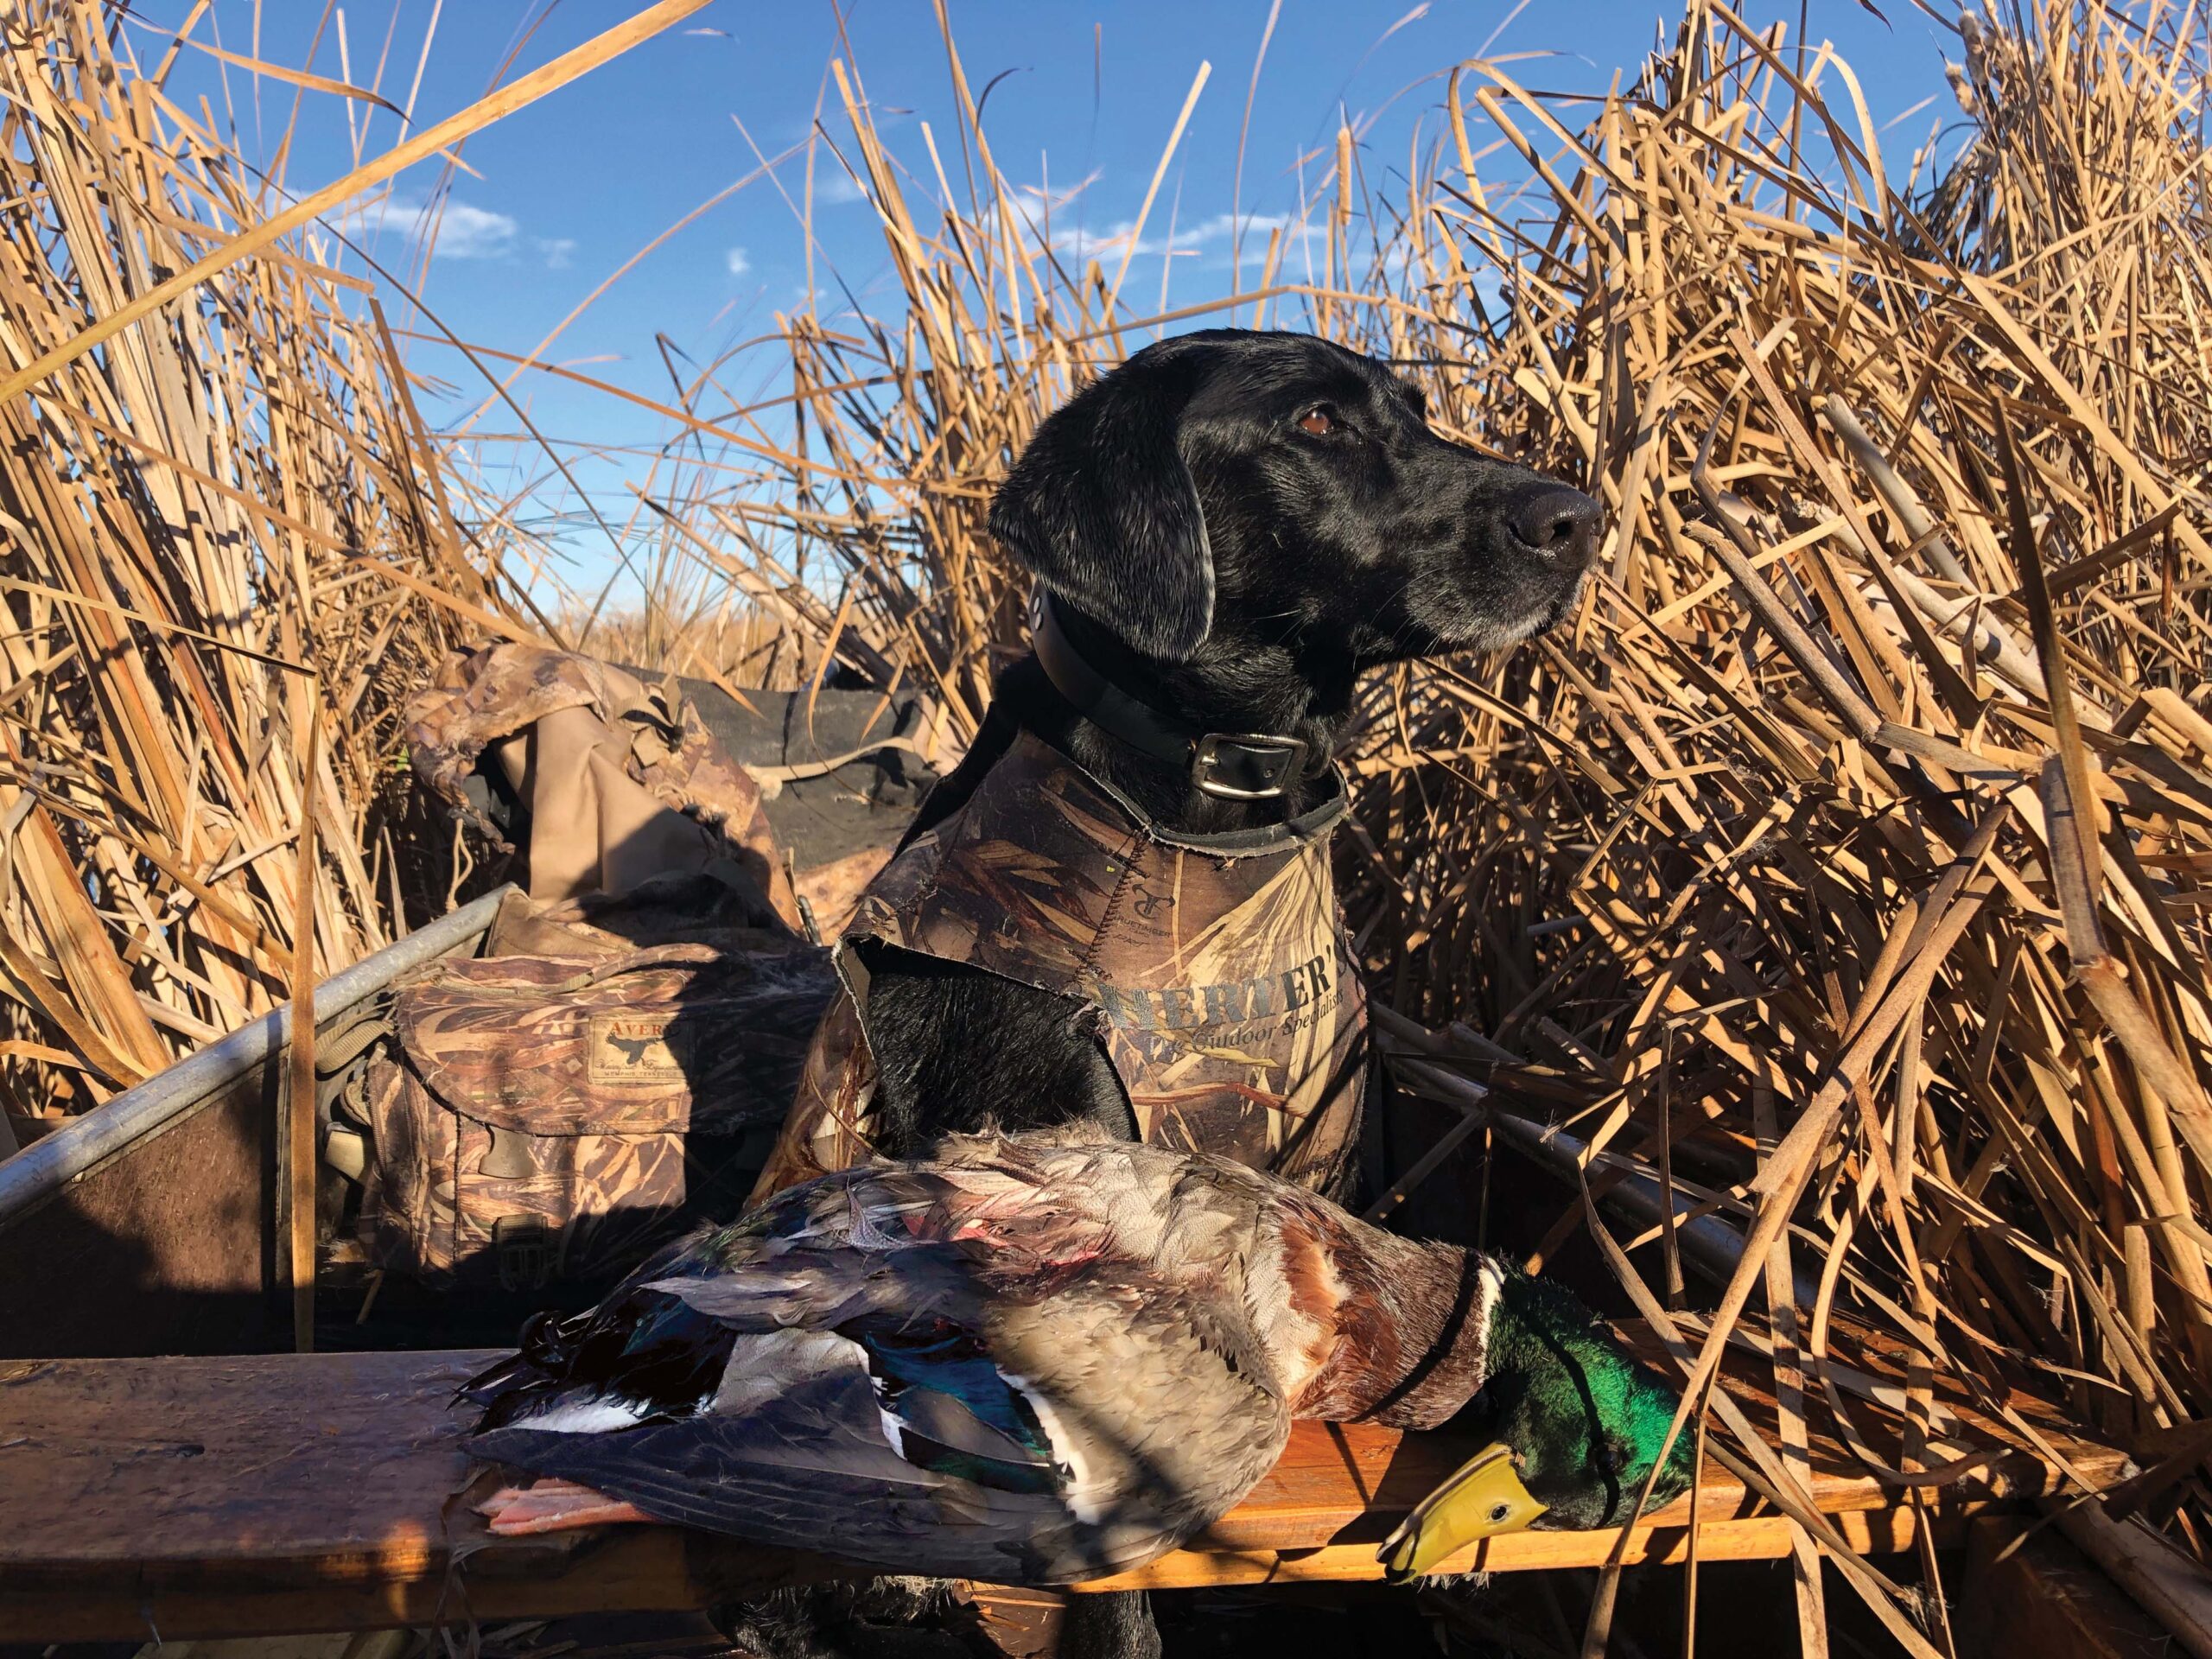 A late-season greenhead is a trophy to some hunters.